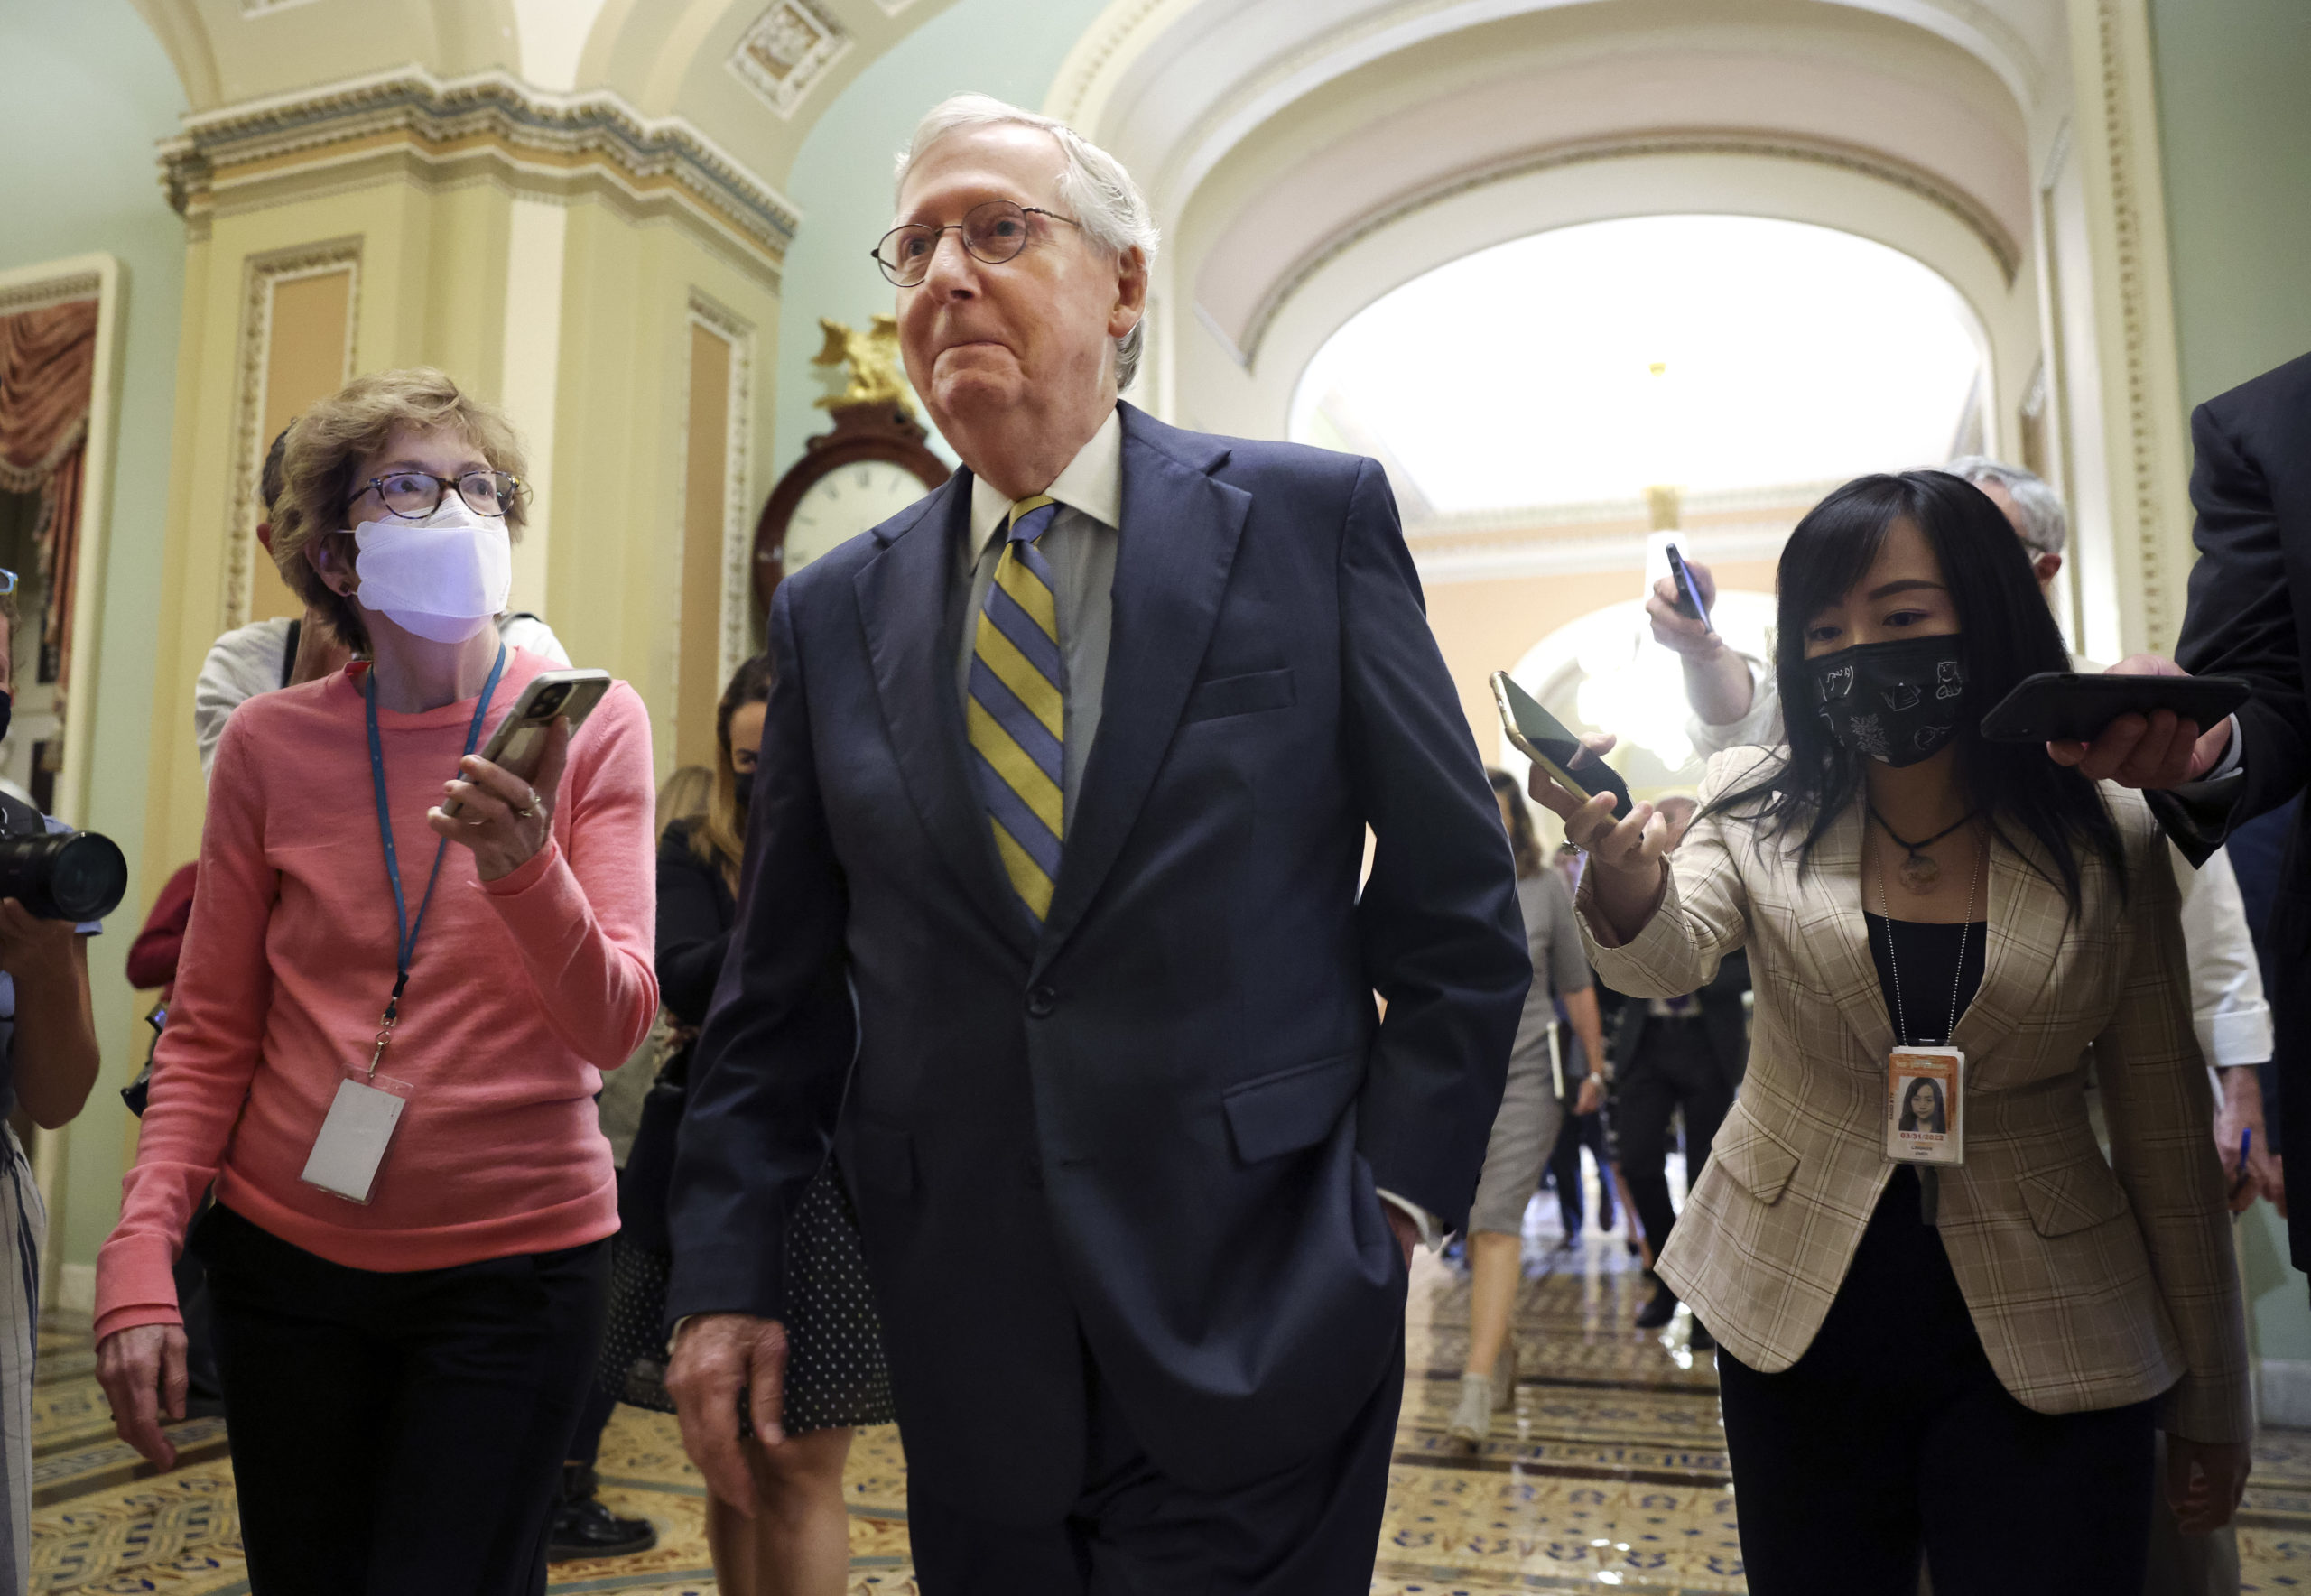 WASHINGTON, DC - OCTOBER 06: Senate Minority Leader Mitch McConnell (R-KY) walks to the Senate Chambers at the U.S. Capitol on October 06, 2021 in Washington, DC. (Photo by Kevin Dietsch/Getty Images)